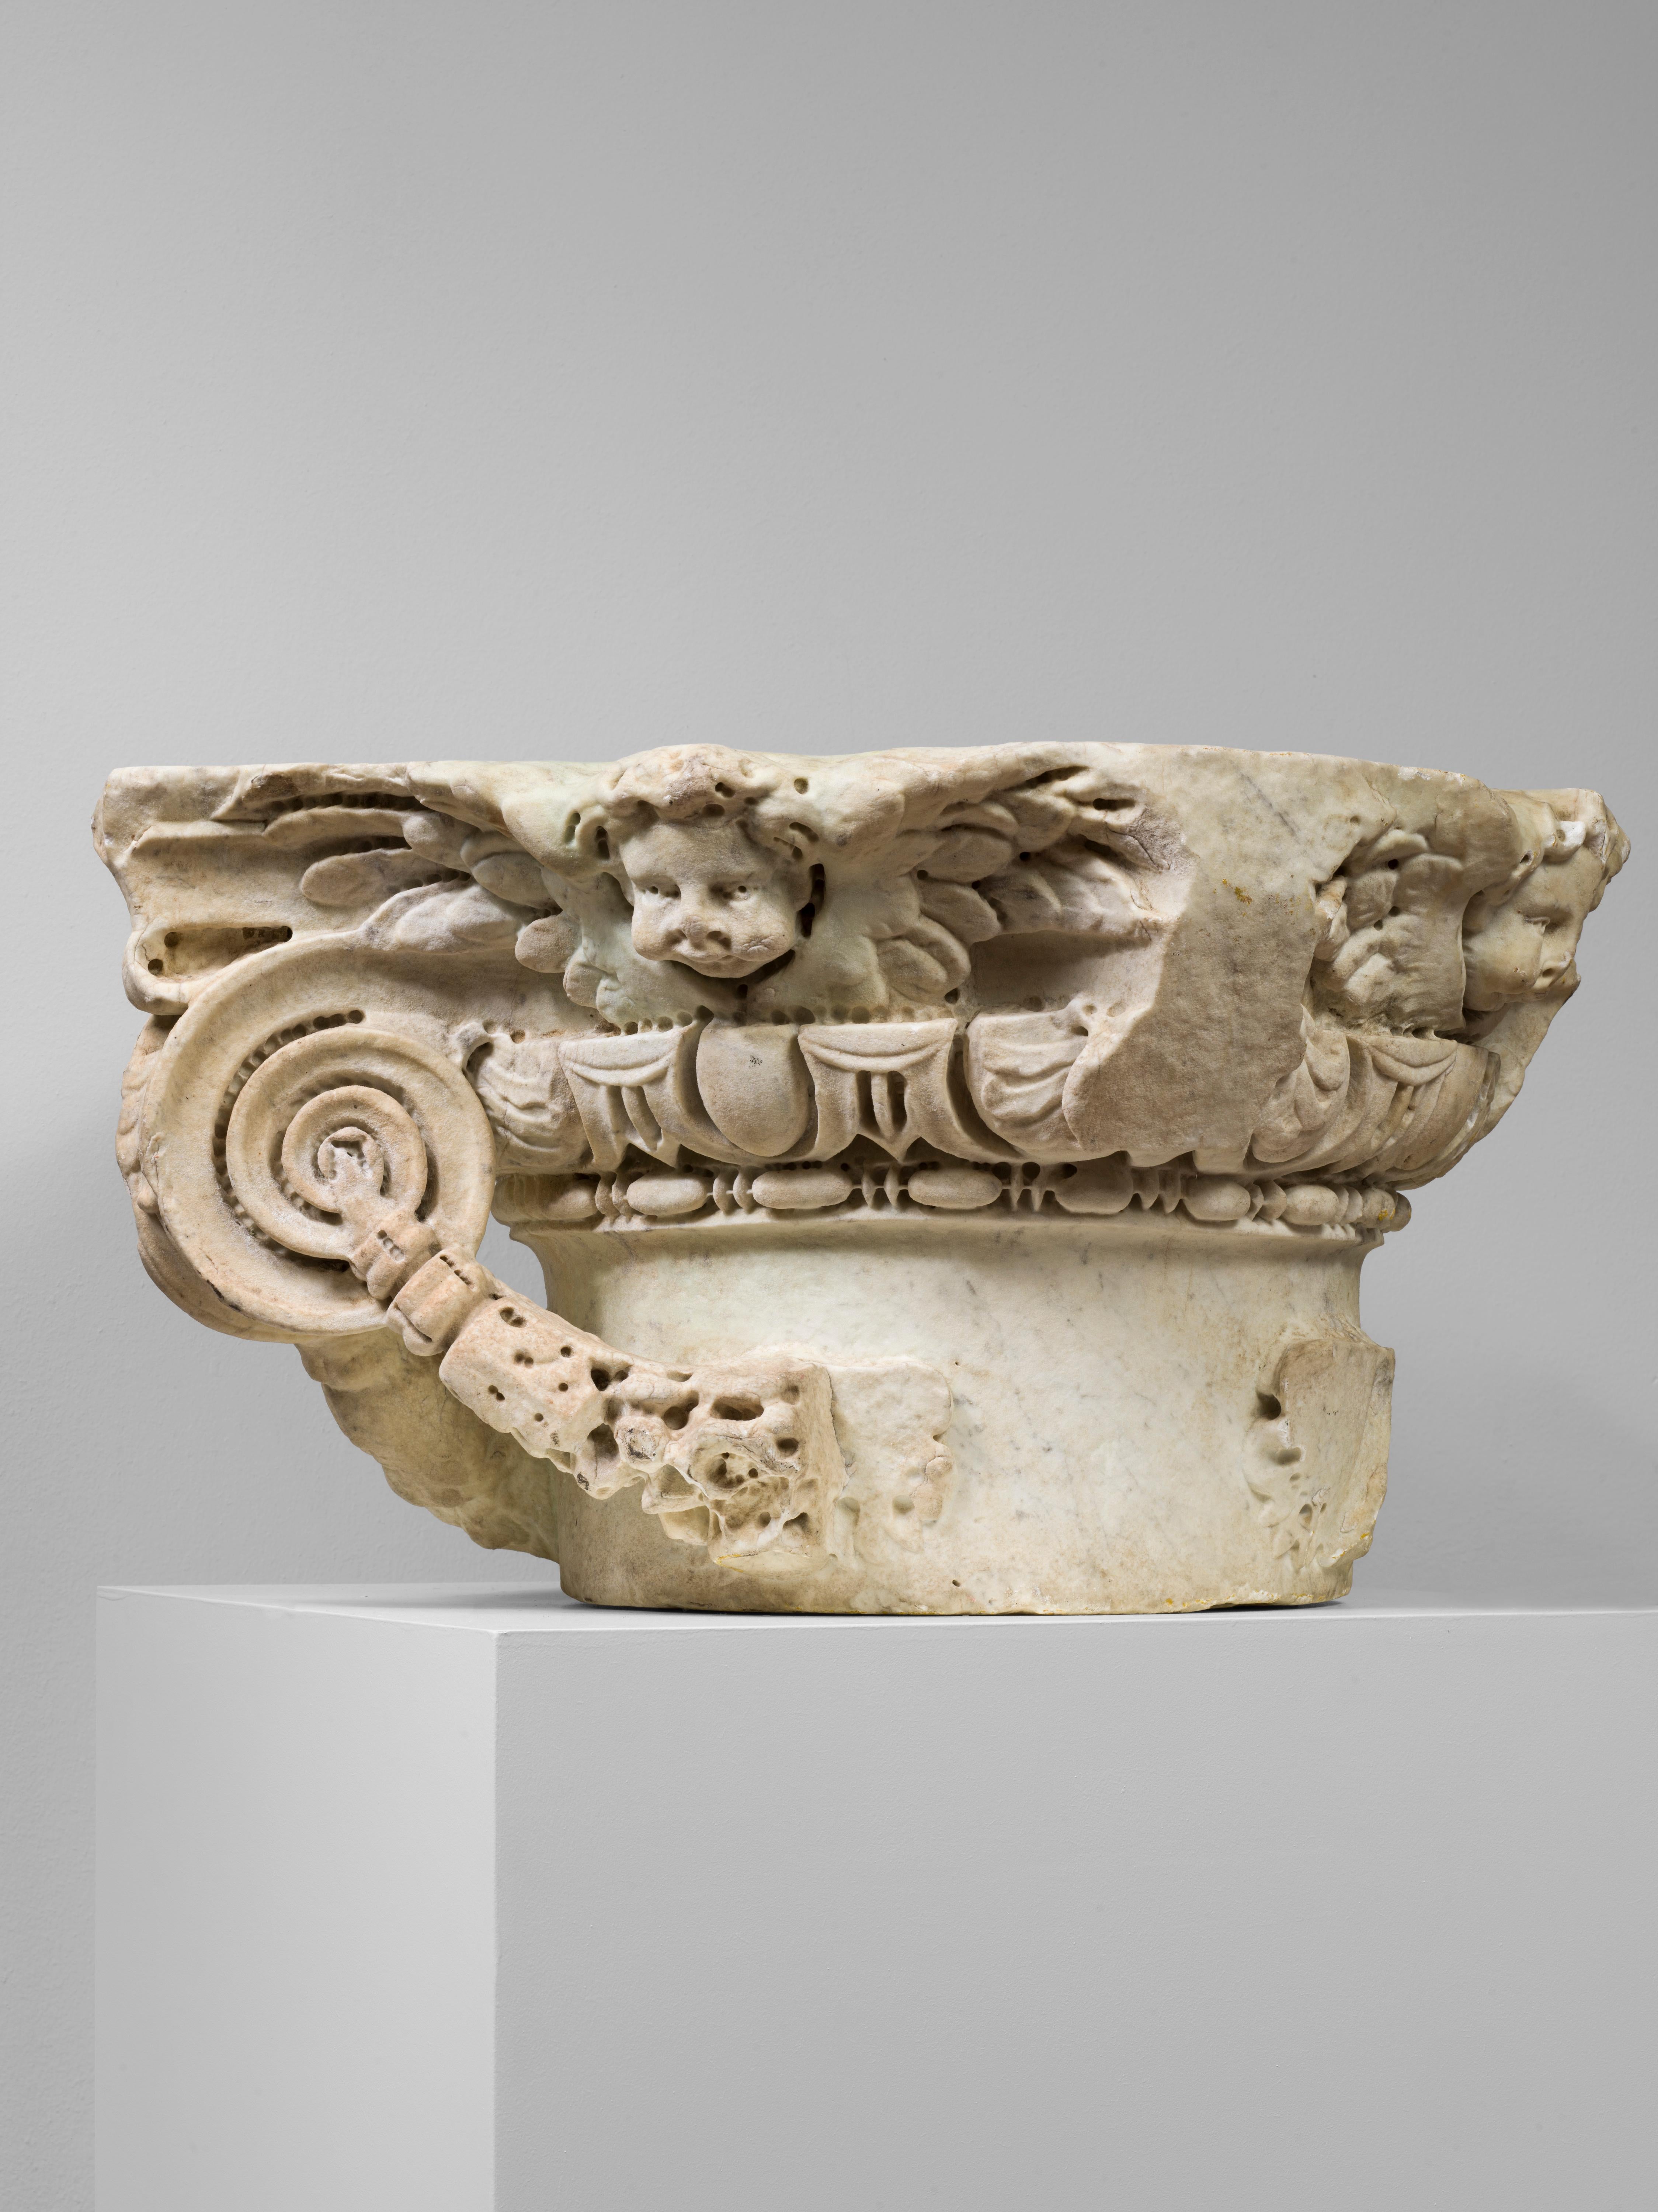 Unknown Figurative Sculpture - ANTIQUE ITALIAN RENAISSANCE IONIC MARBLE CAPITAL WITH PUTTI, 16TH CENTURY